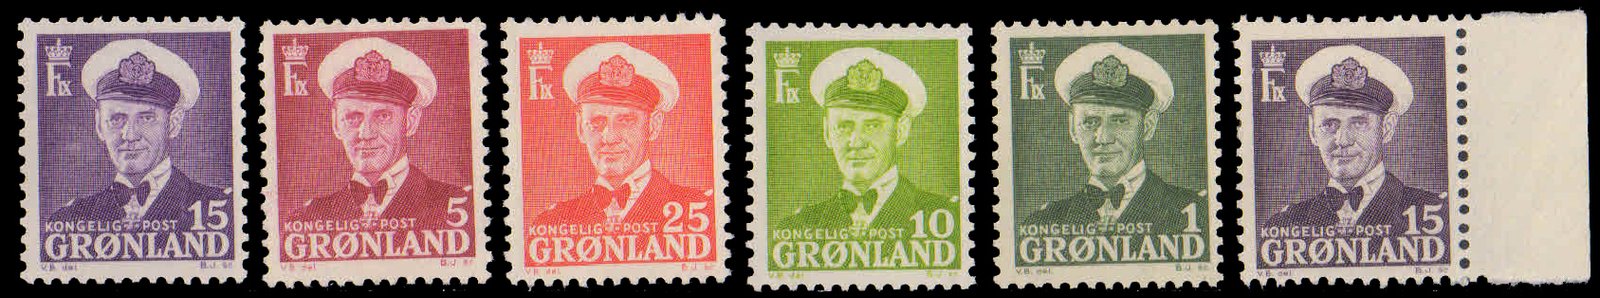 GREENLAND 1950-King Frederik IX, Set of 6 with both shade of 15 Ore, MNH, S.G. 26-30-Cat � 6-